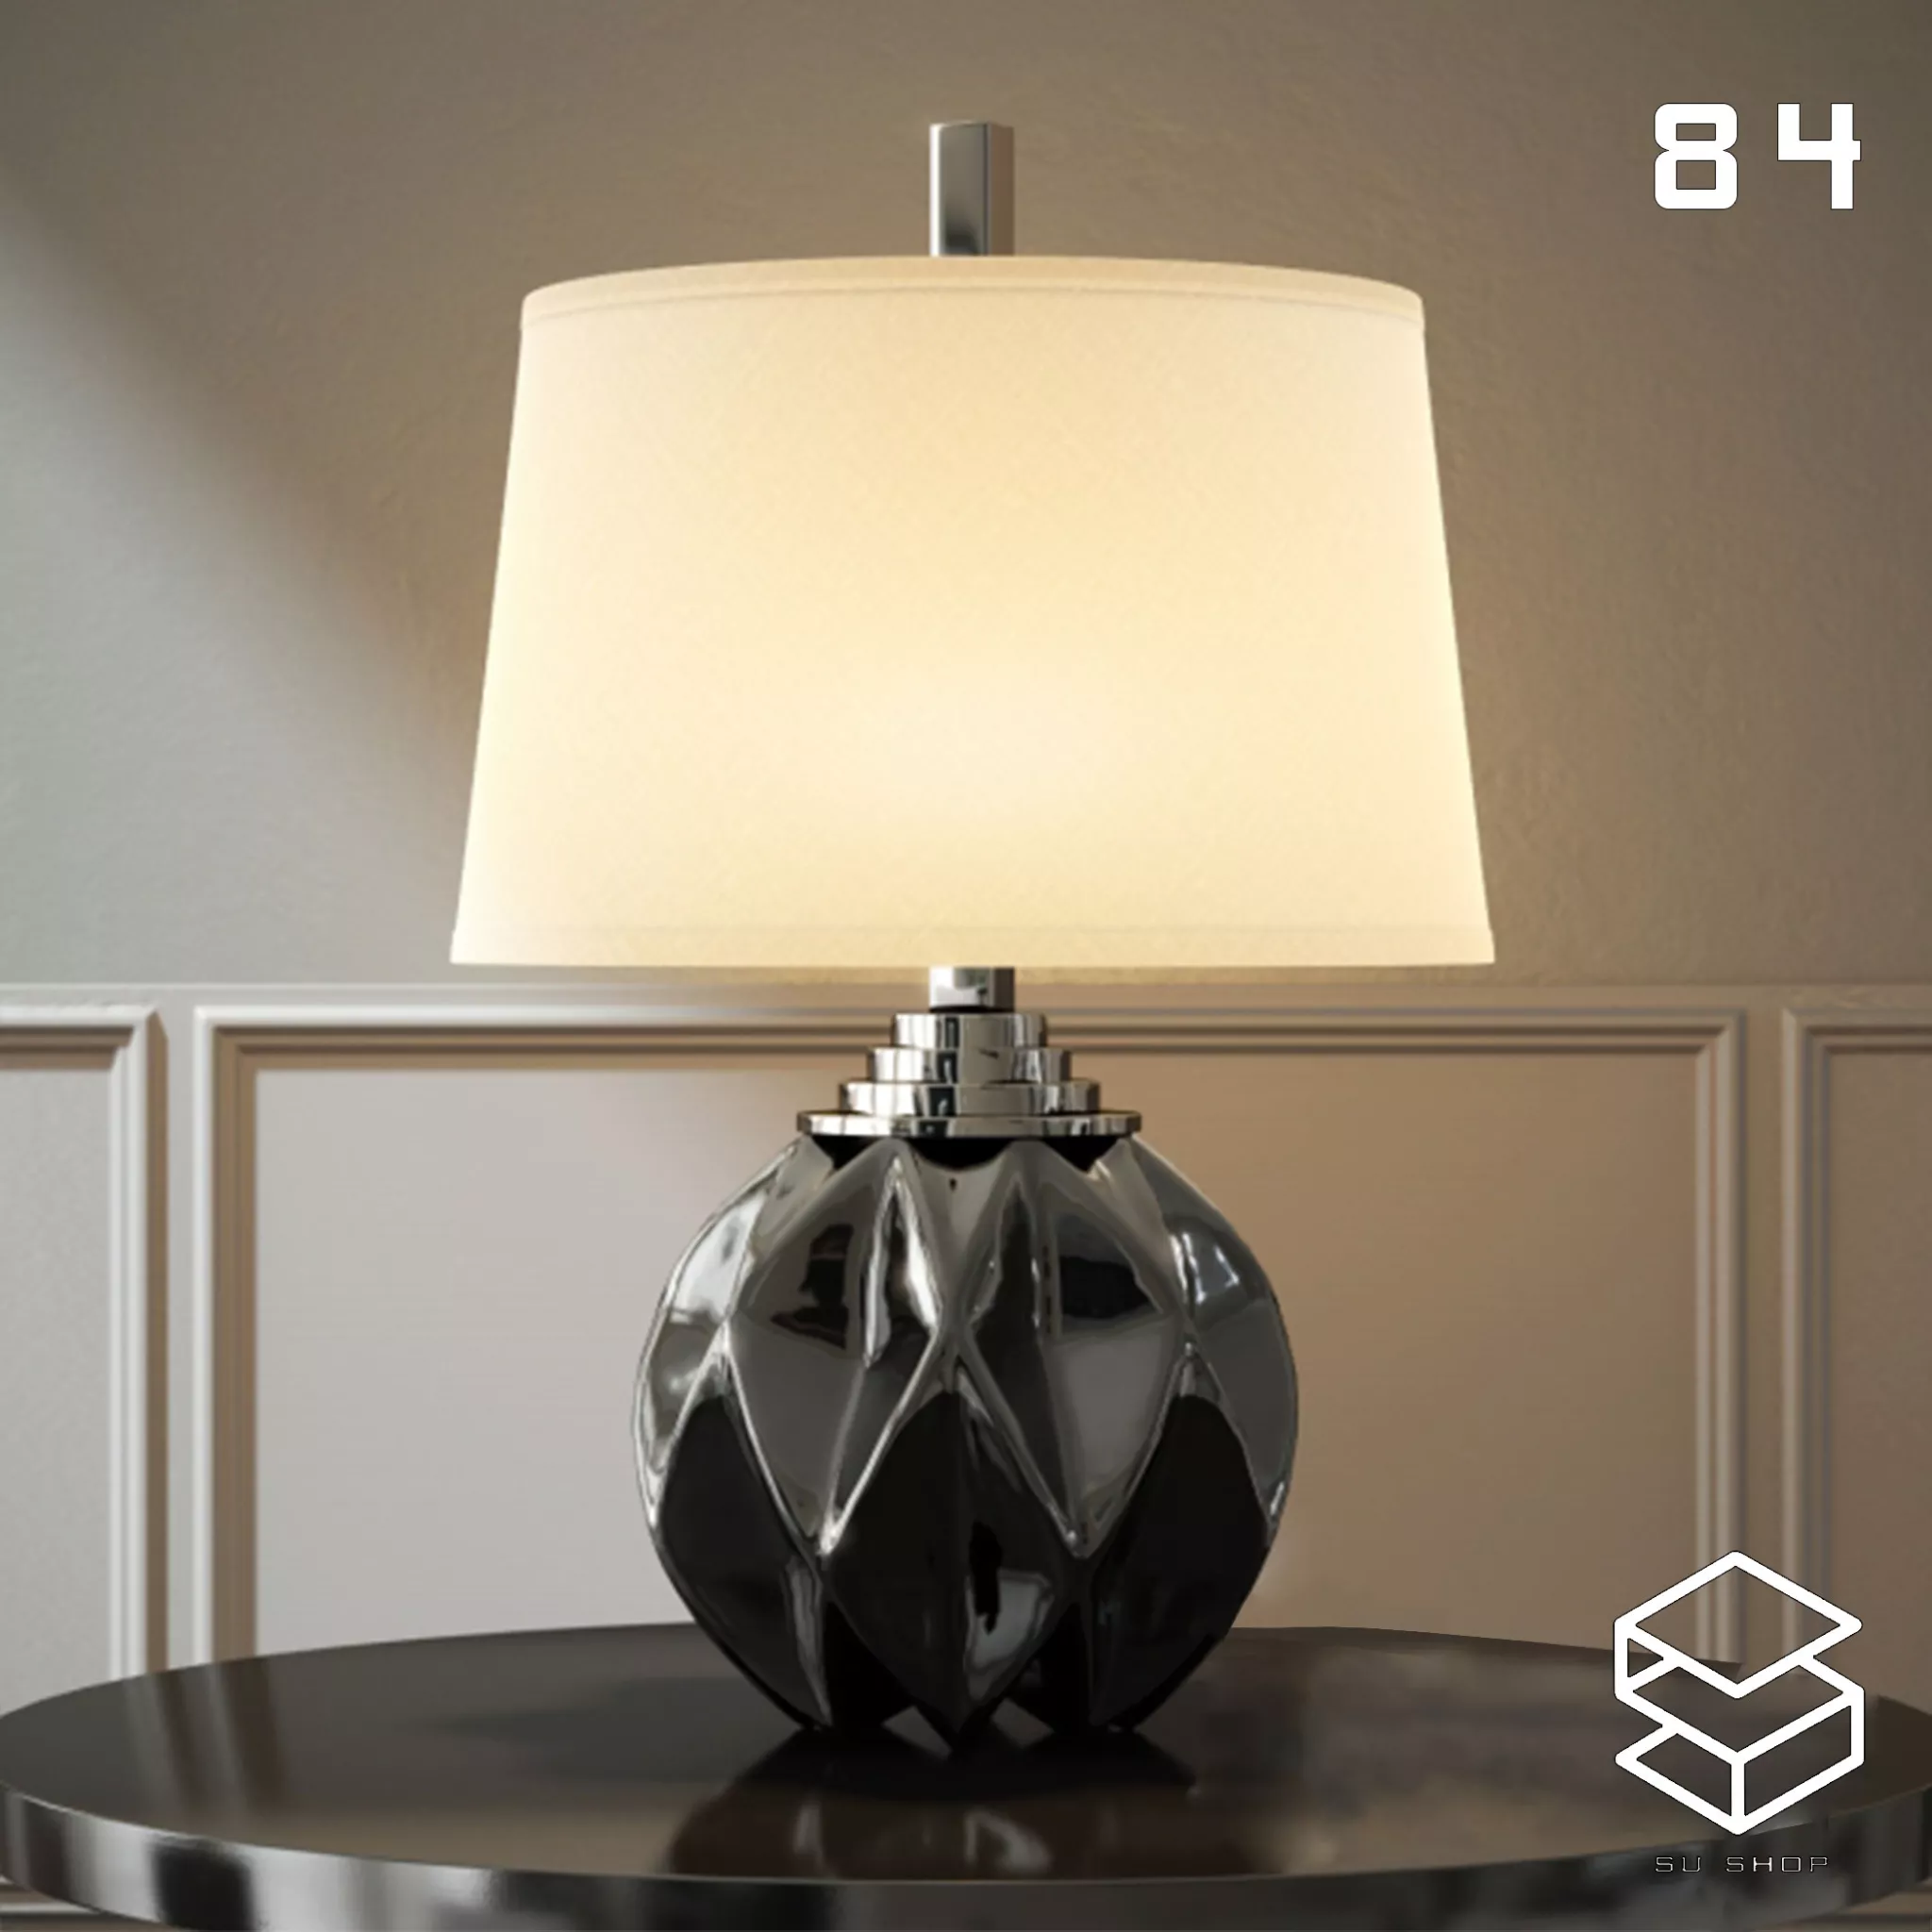 MODERN TABLE LAMP - SKETCHUP 3D MODEL - VRAY OR ENSCAPE - ID14882